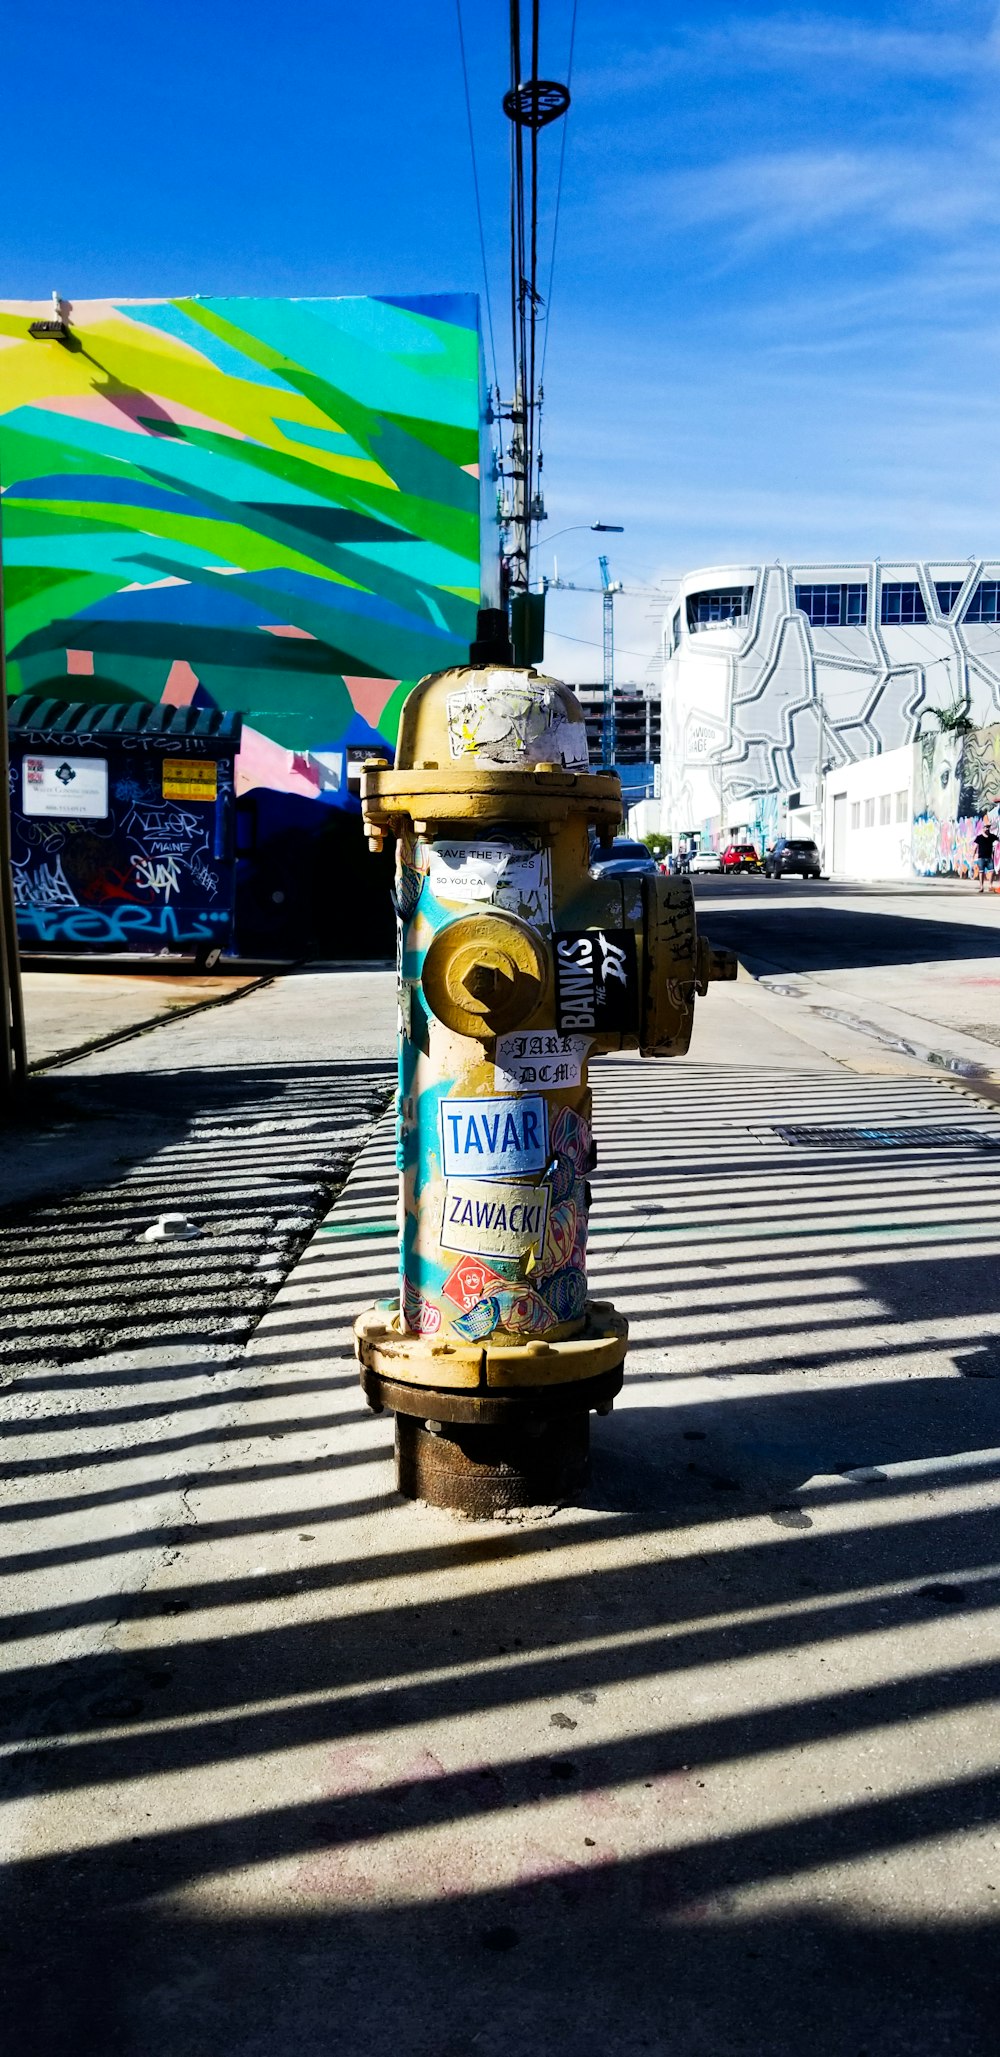 yellow fire hydrant near road viewing building with multicolored art